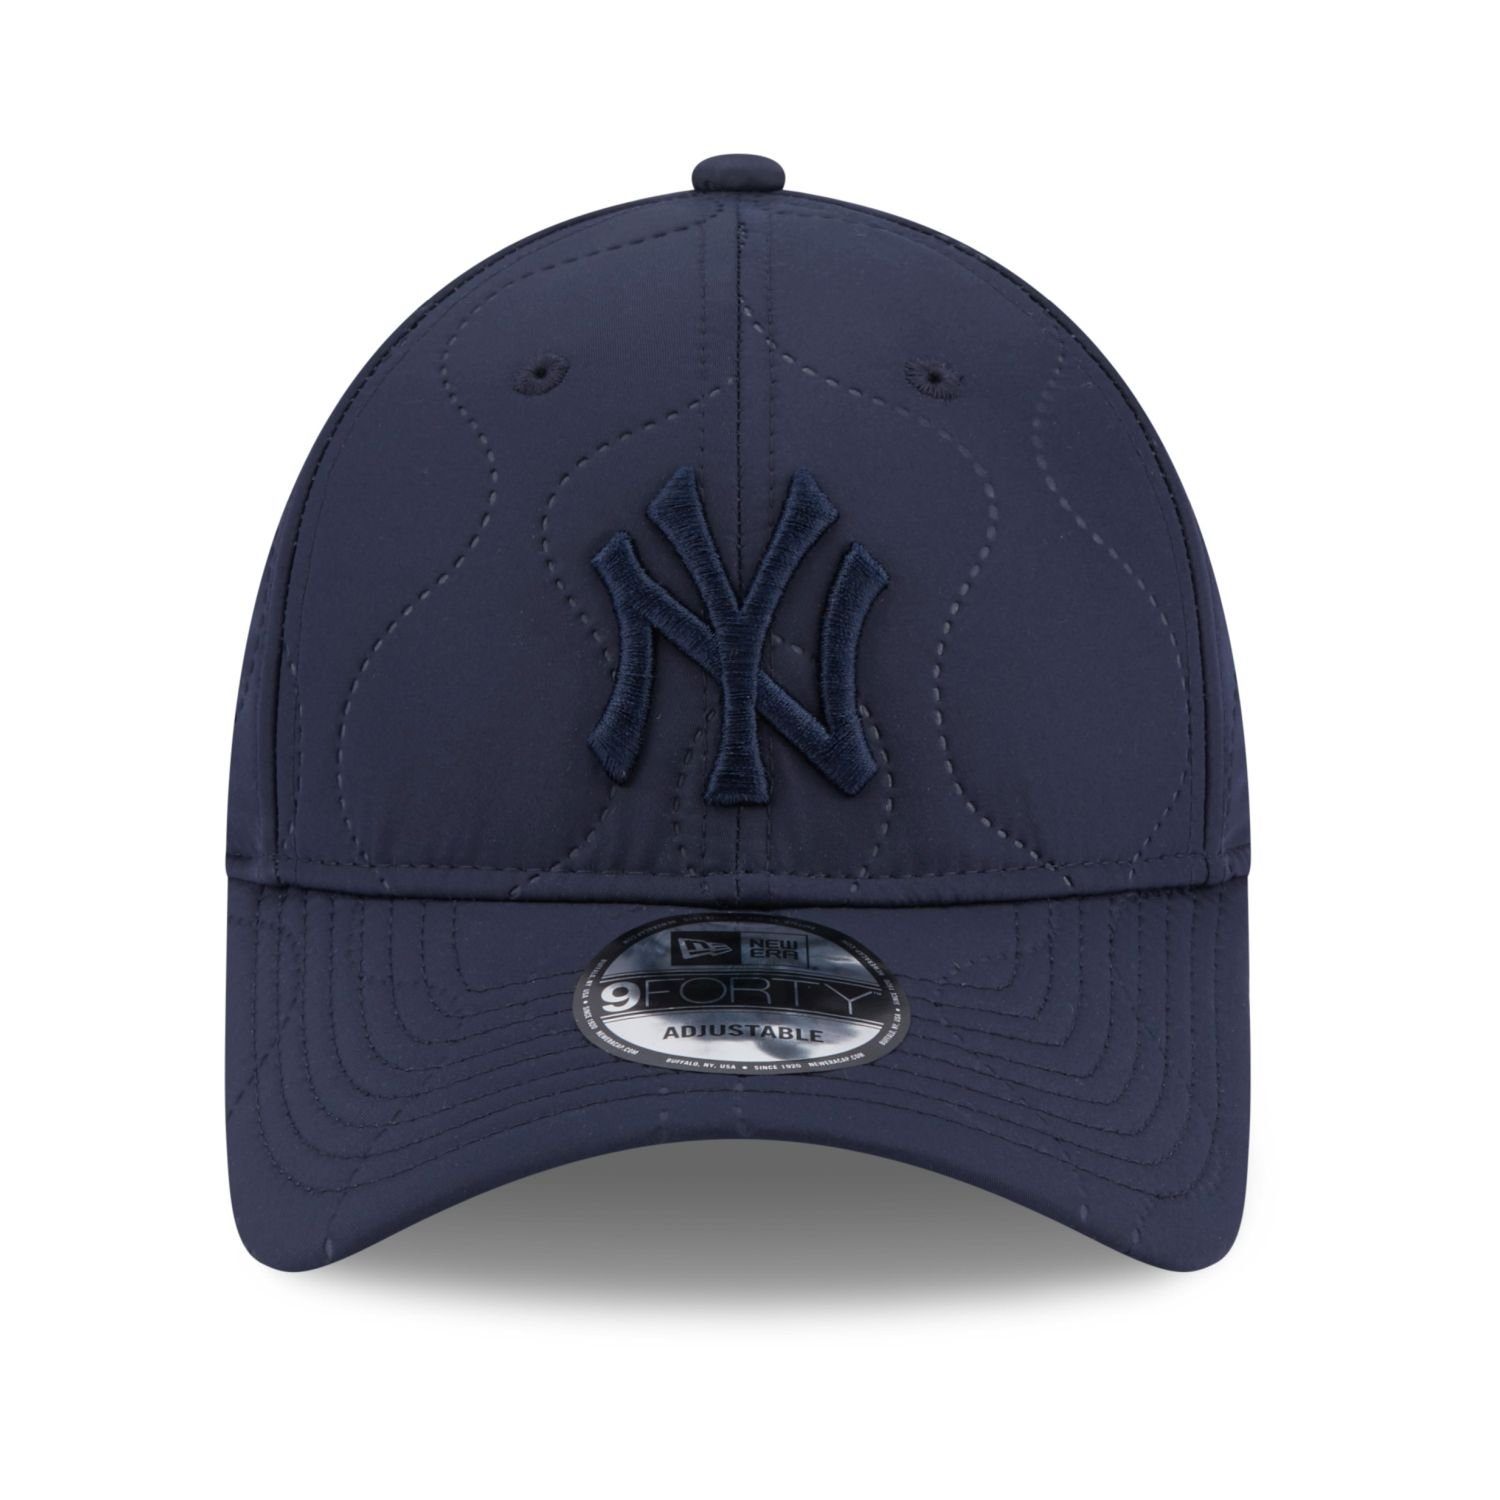 New Cap York Era New ClipBack Yankees Trucker 9Forty QUILTED